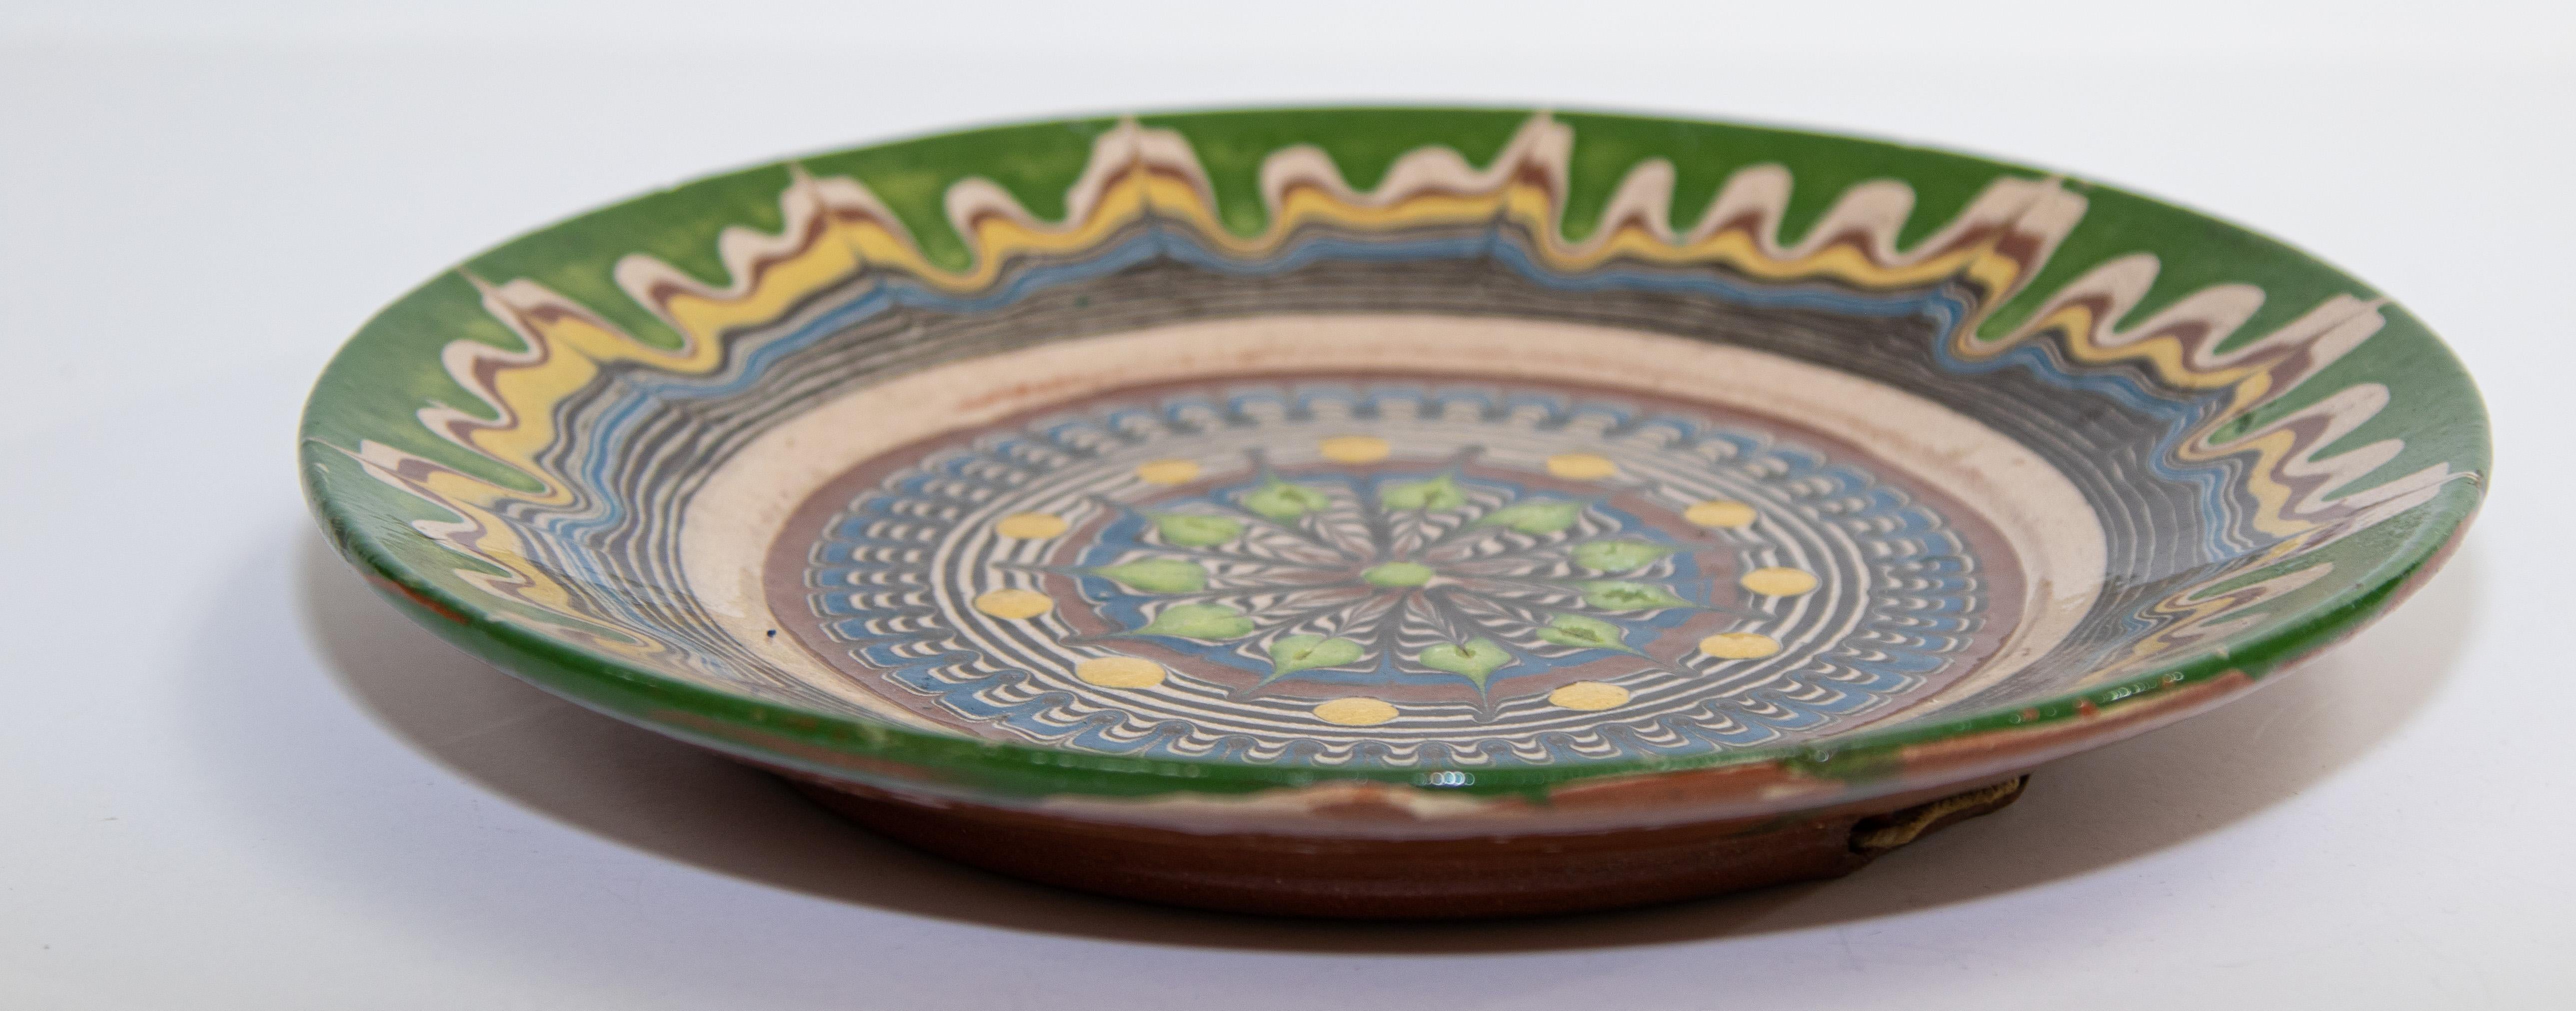 Hand-Painted Terra Cotta Vintage Danish Pottery Decorative Plate In Good Condition For Sale In North Hollywood, CA